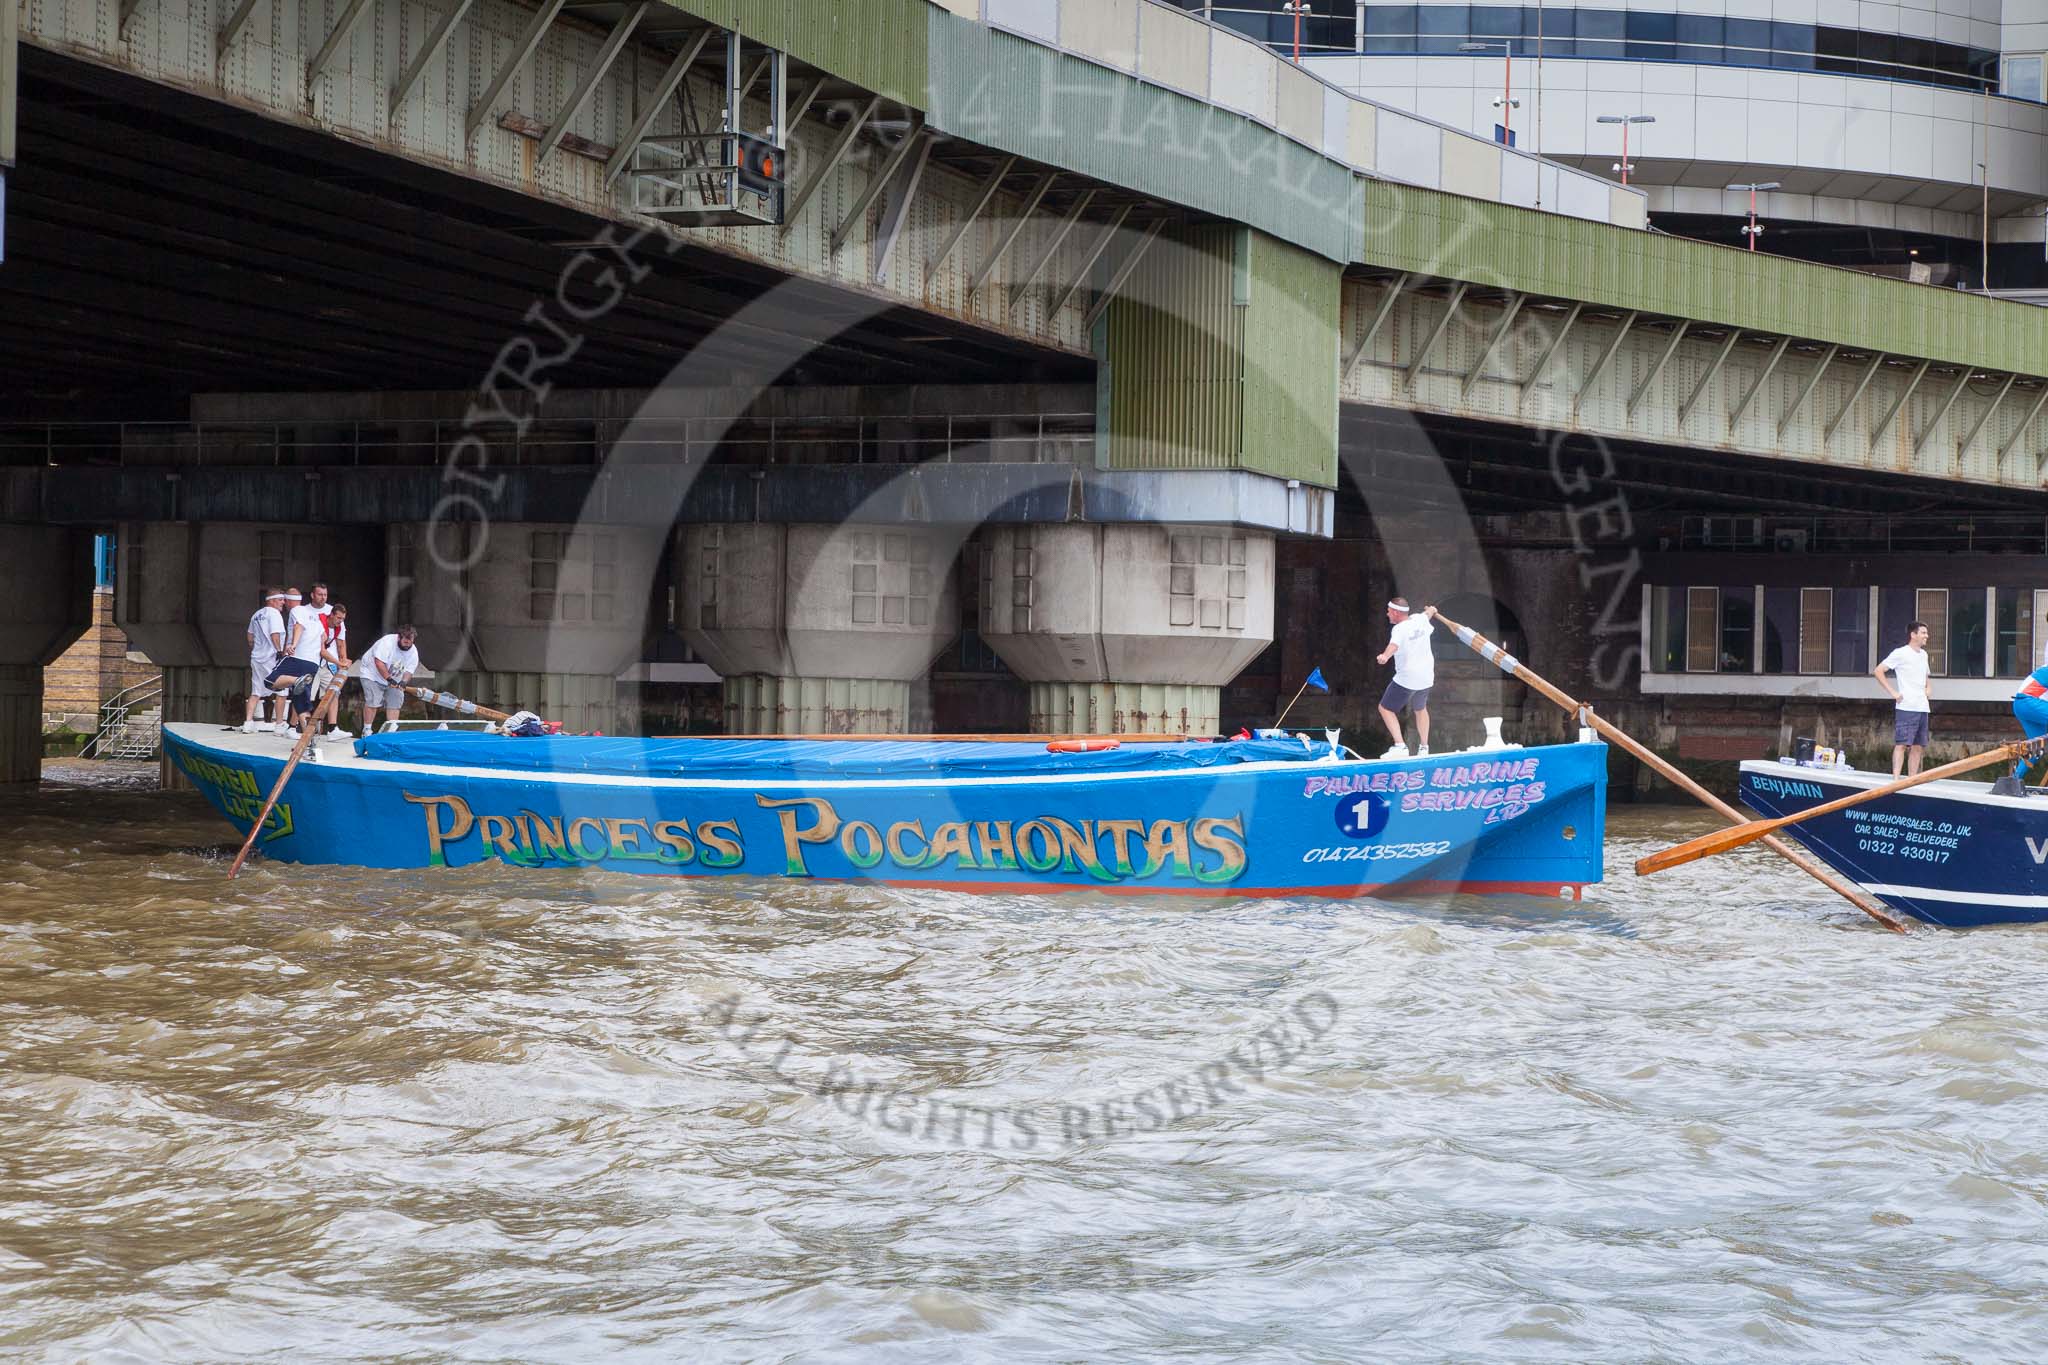 TOW River Thames Barge Driving Race 2014.
River Thames between Greenwich and Westminster,
London,

United Kingdom,
on 28 June 2014 at 13:45, image #291